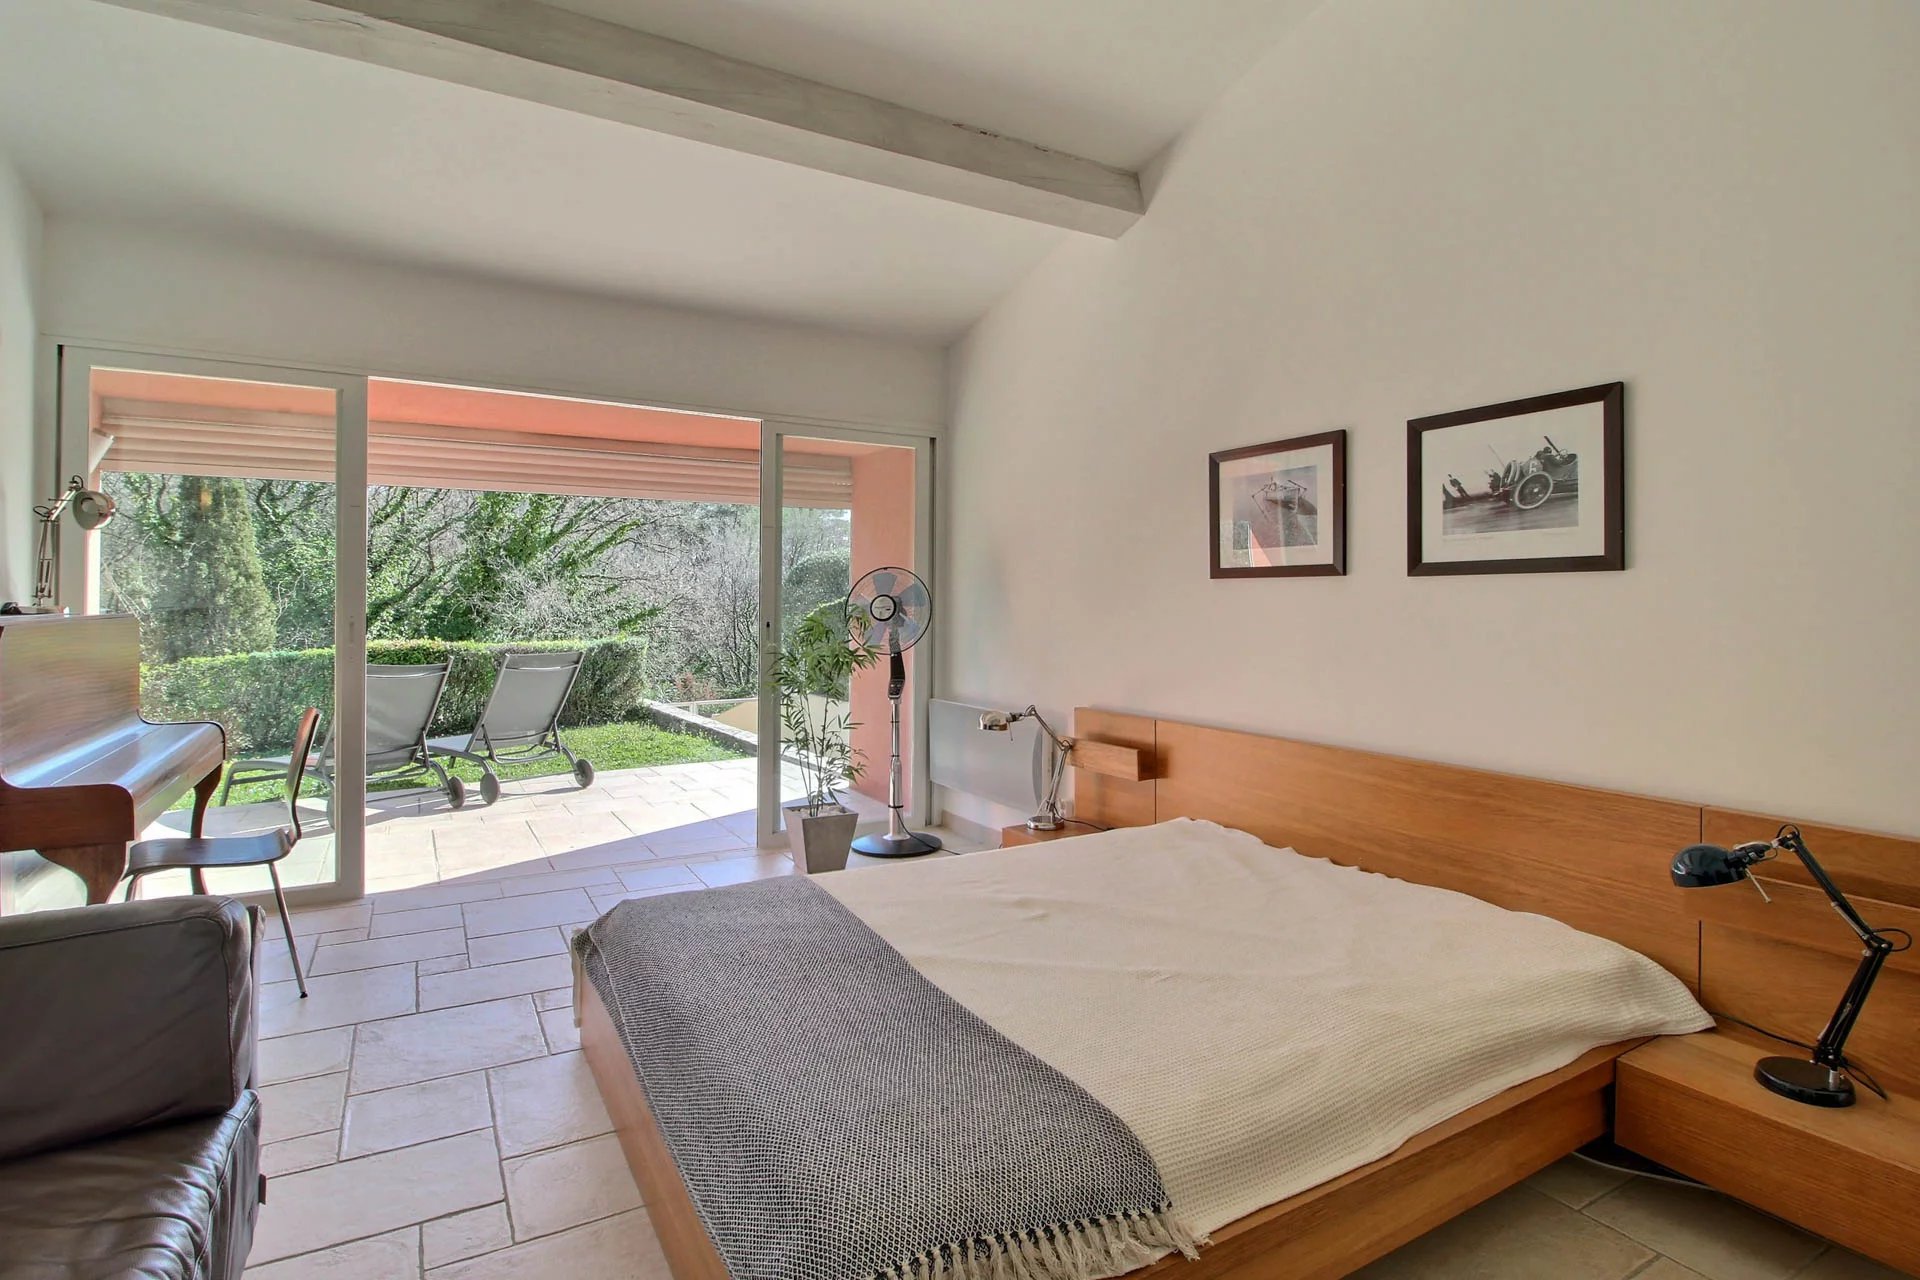 Villa with pool within walking distance of the village - Montauroux